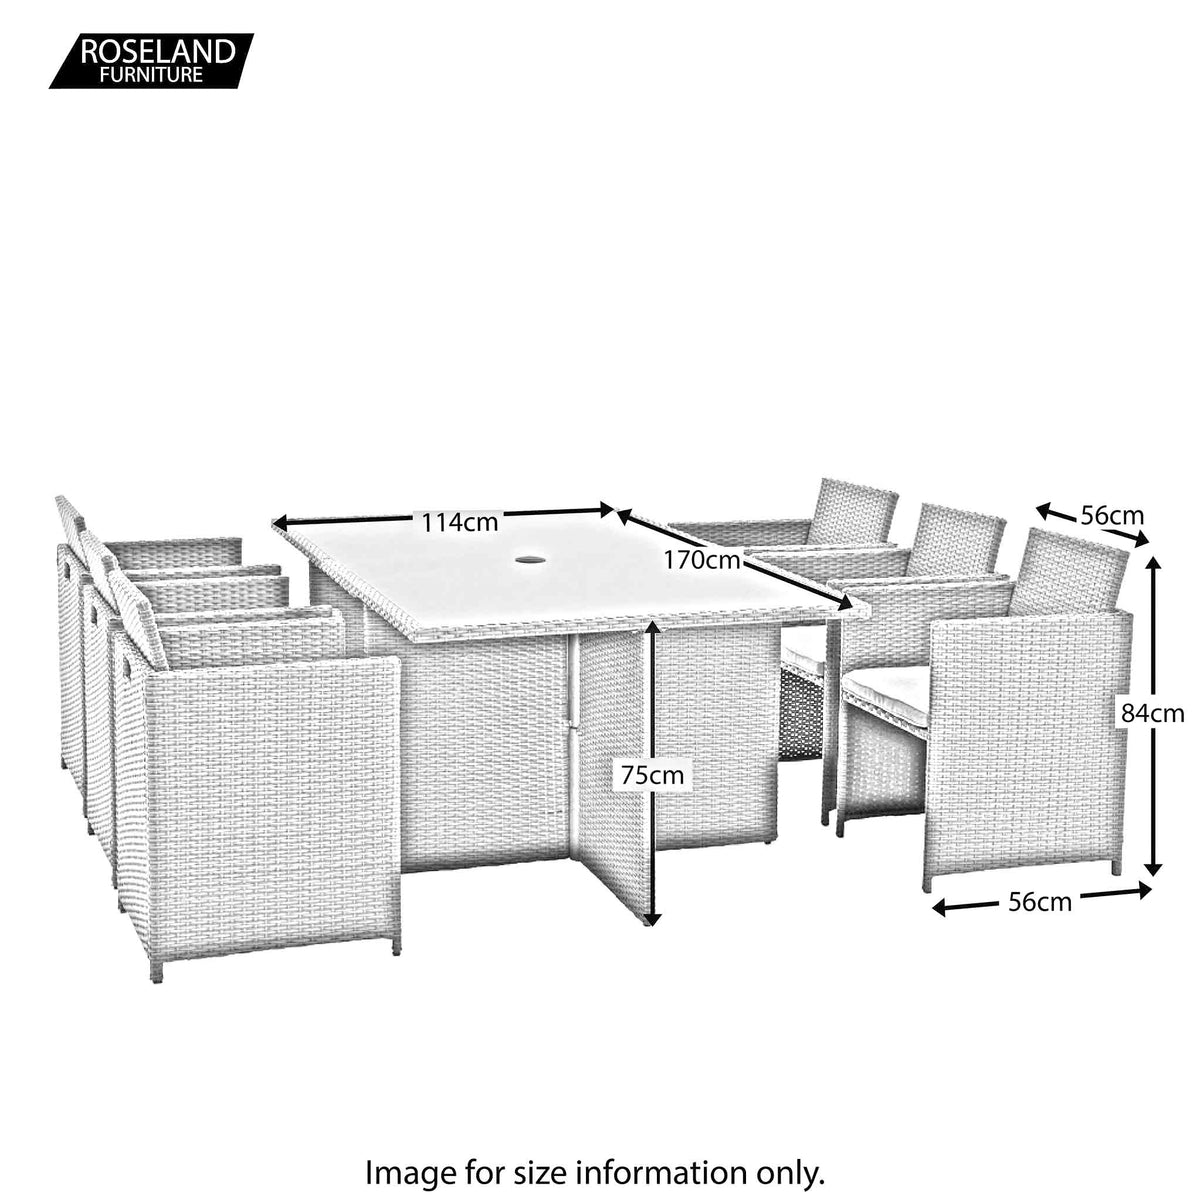 Vada Brown 6 Seat Rattan Cube Set - Size Guide